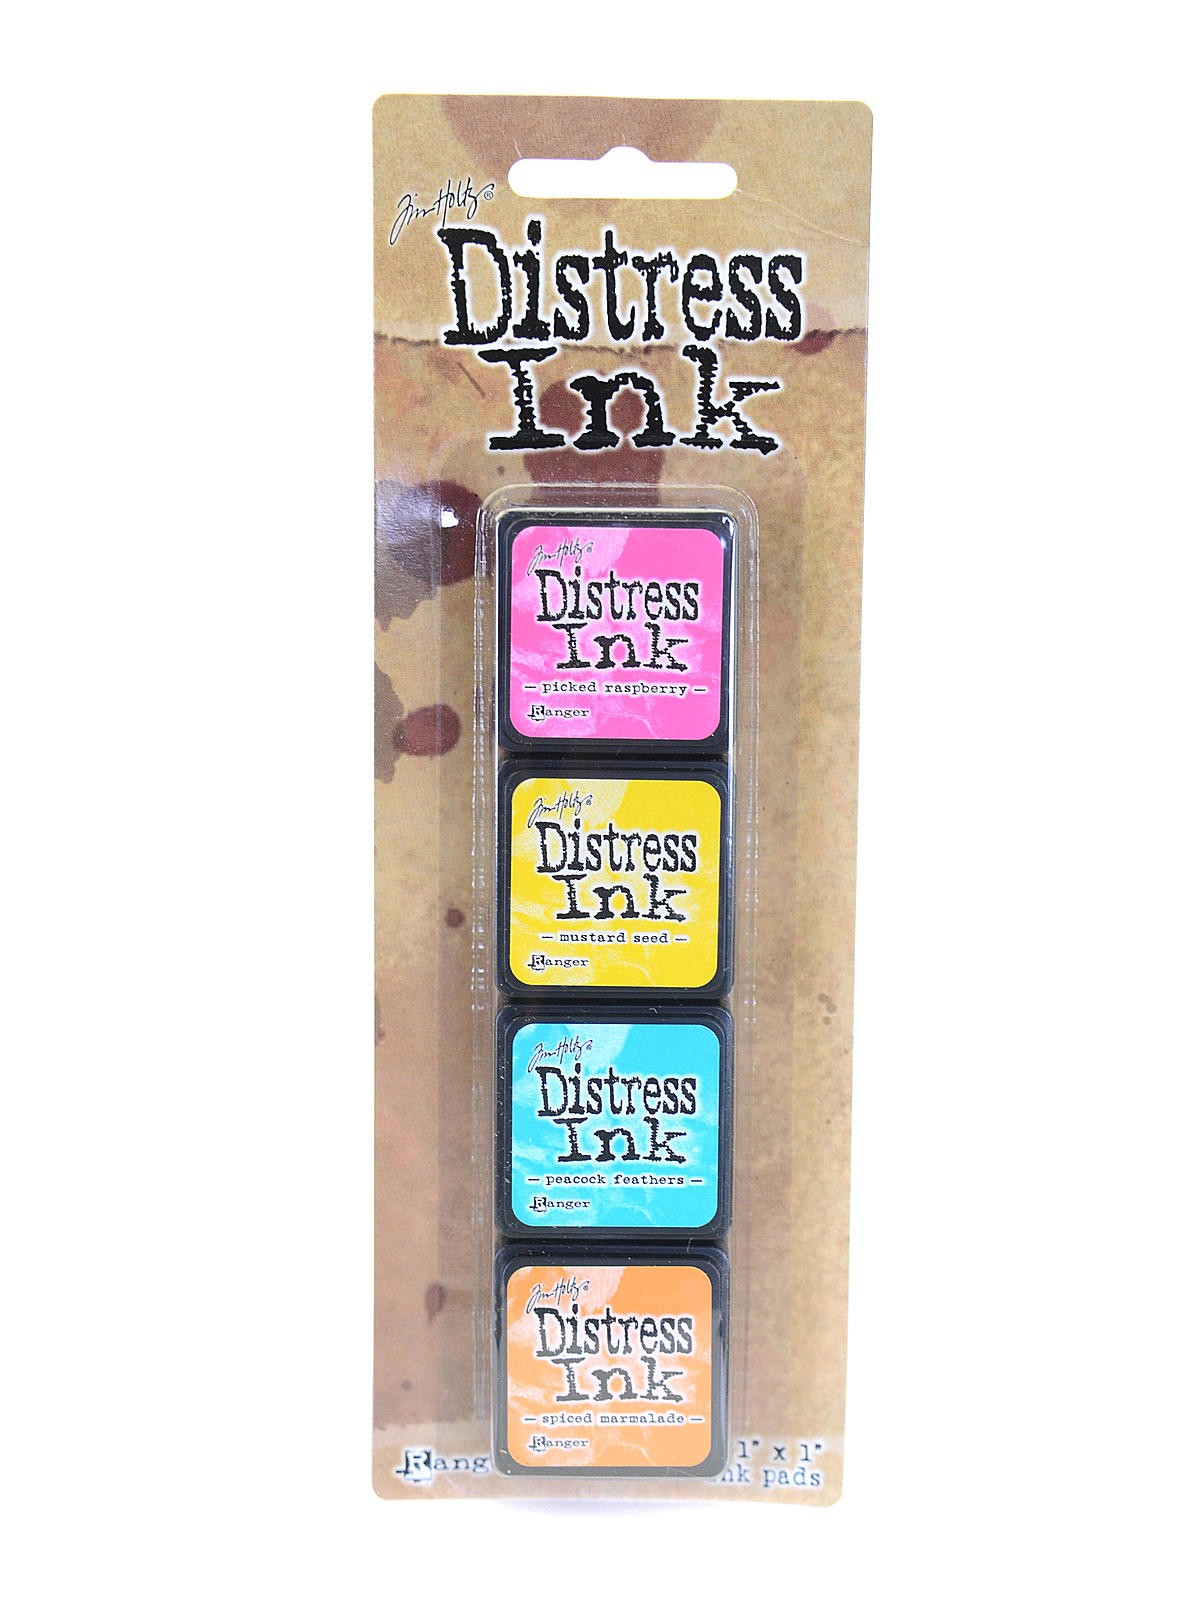 Tim Holtz Mini Distress Ink Pads Kit #1 1 In. X 1 In. Set Of 4 Colors